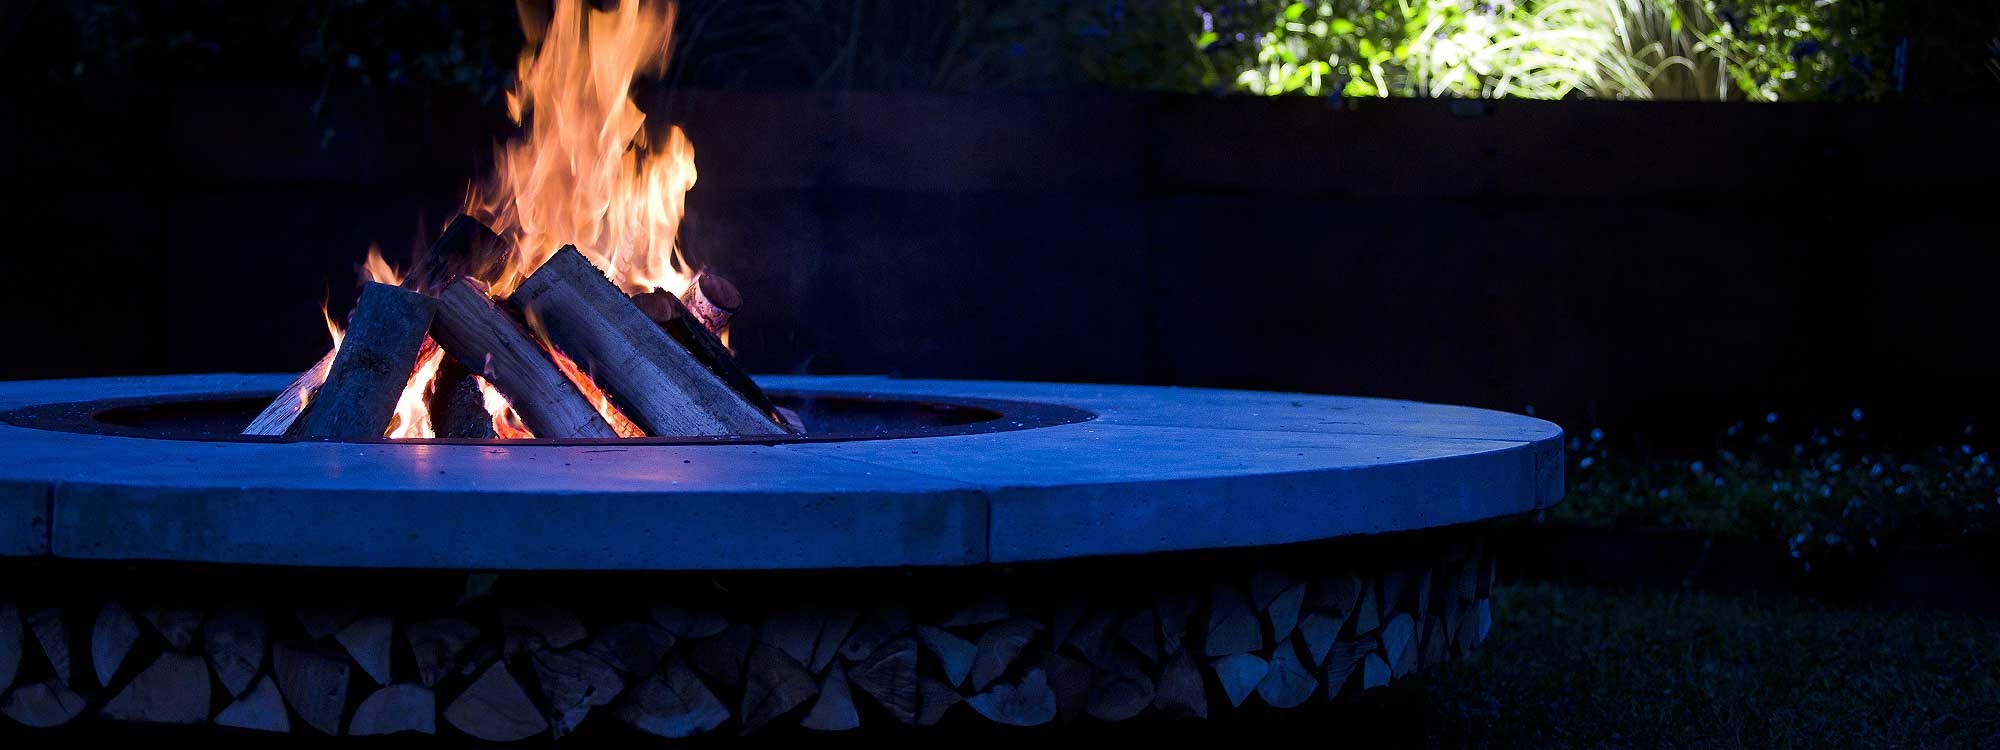 Nighttime image of flames licking within Ercole concrete fire pit by AK47 Design